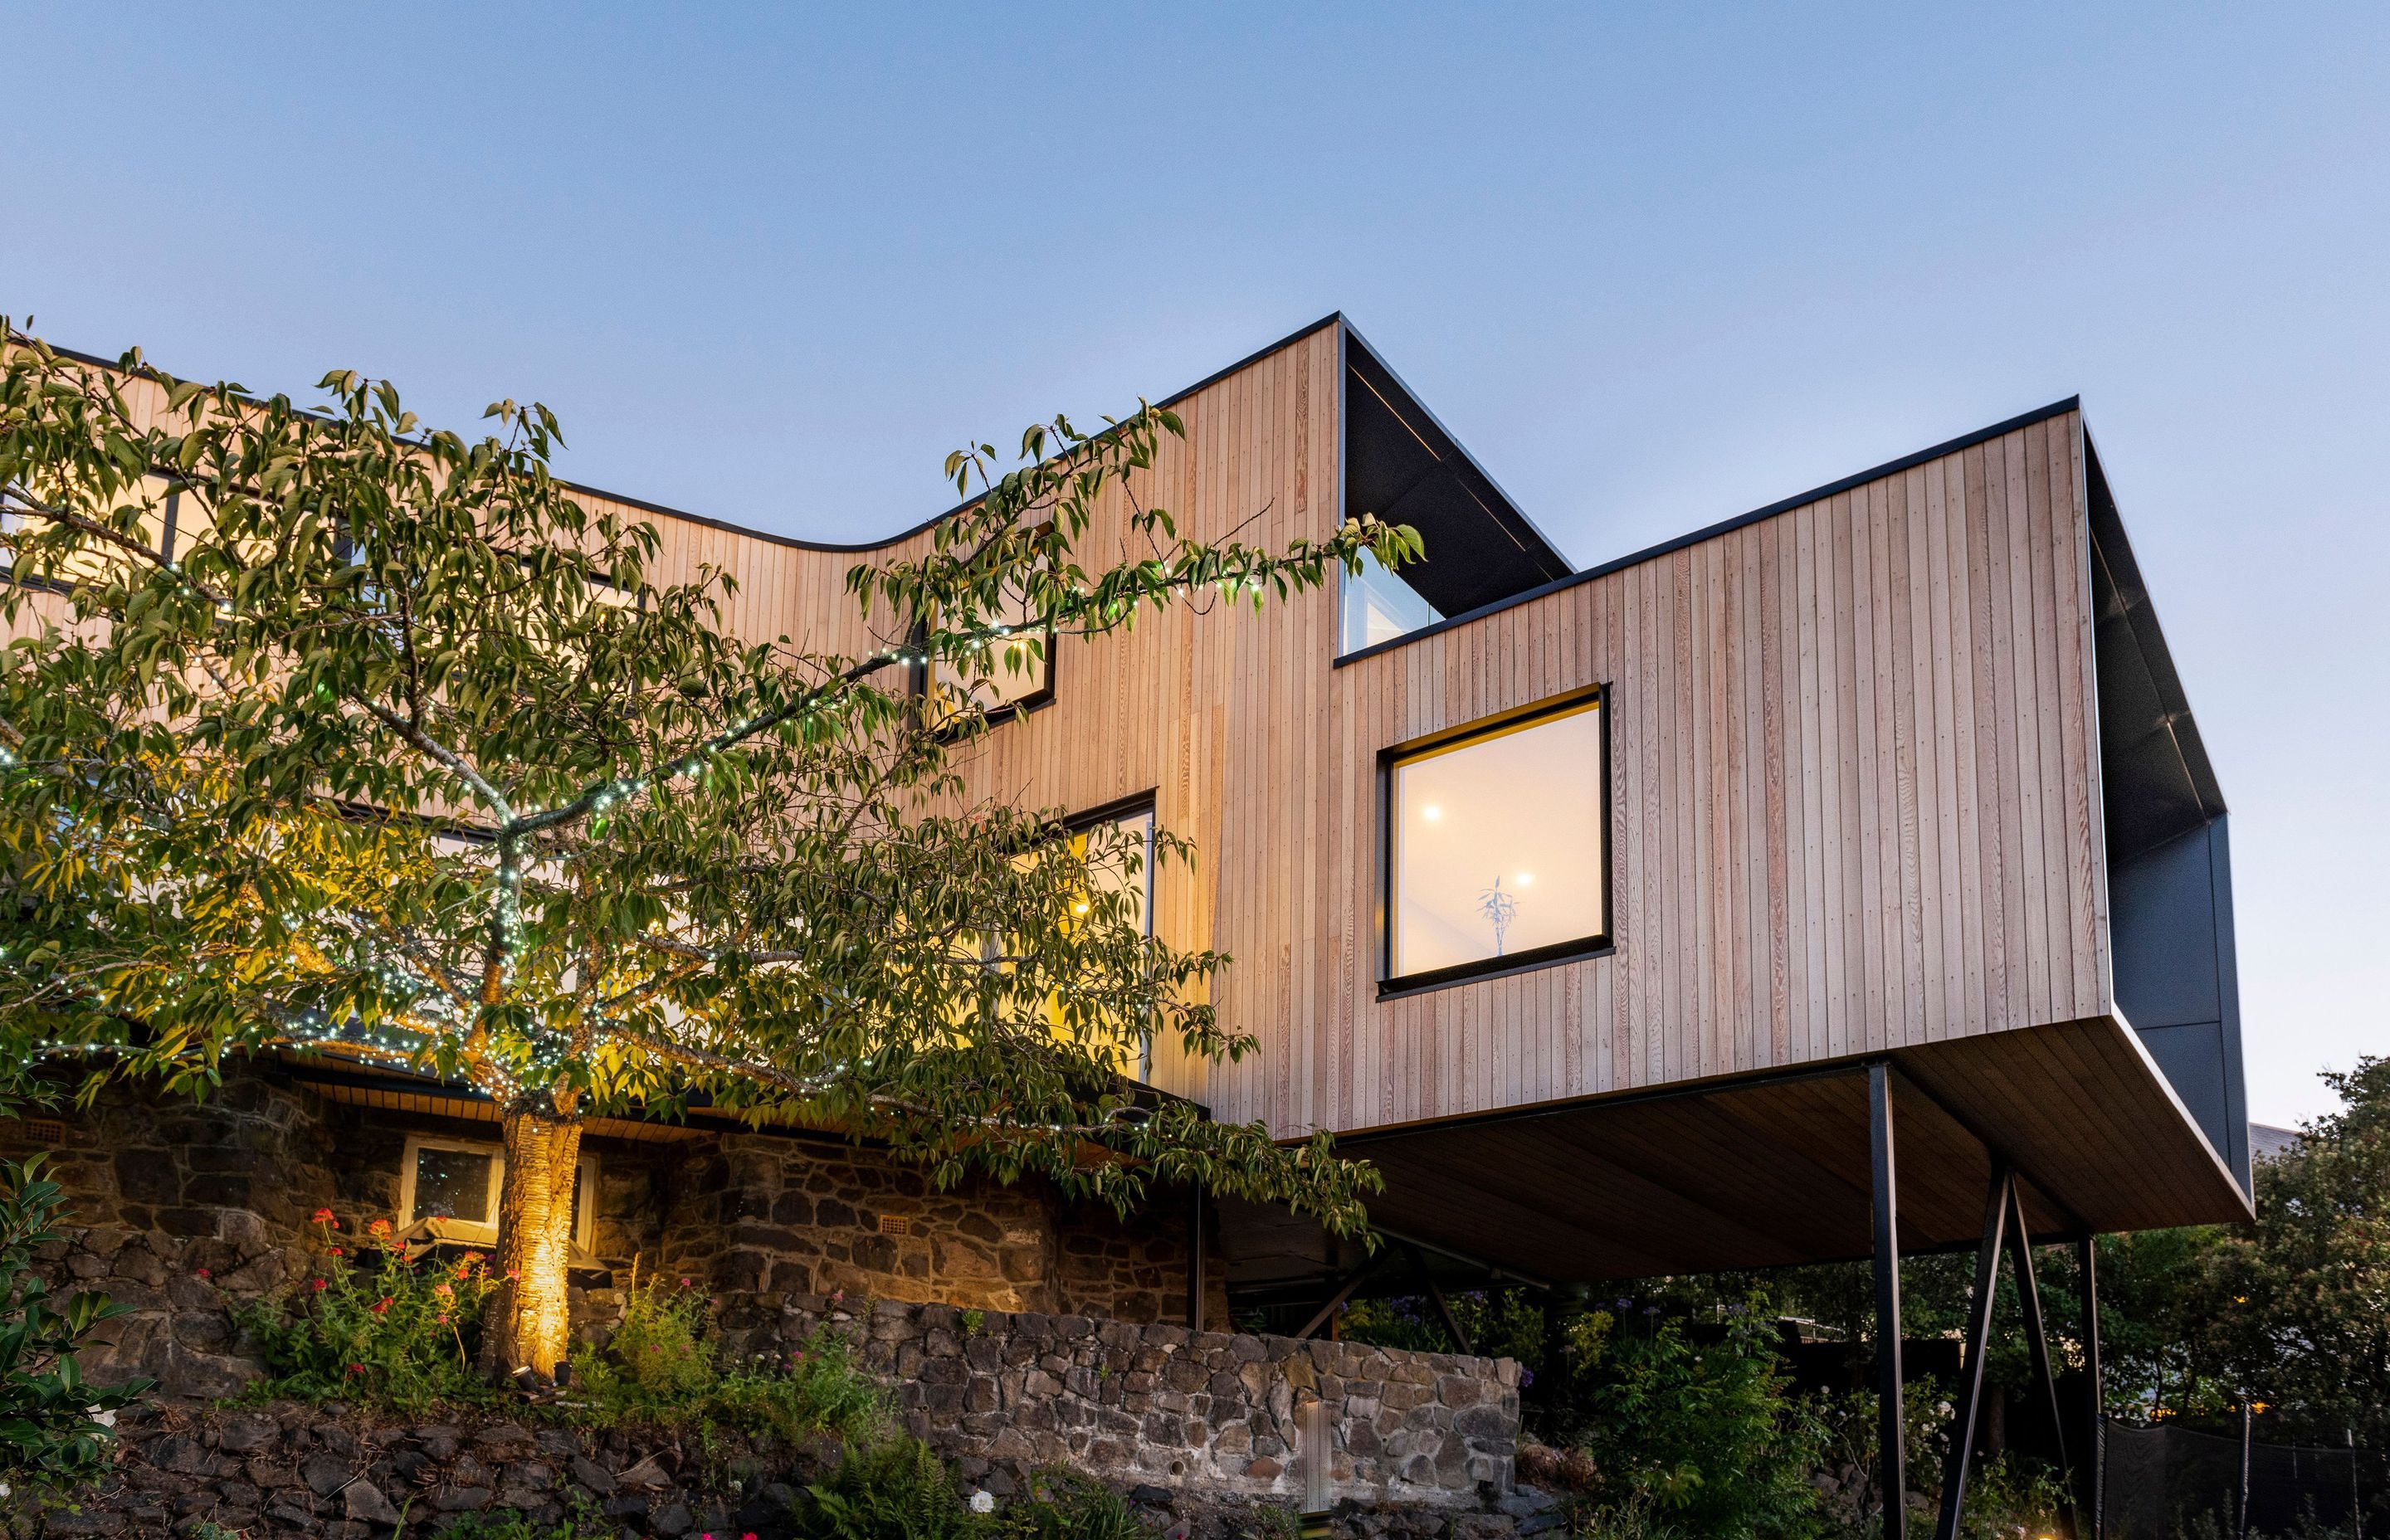 Built to 200 per cent of the earthquake code, the new house  cantilevers out over the historic stone walls of the old Seager house destroyed during the February 2011 quake.